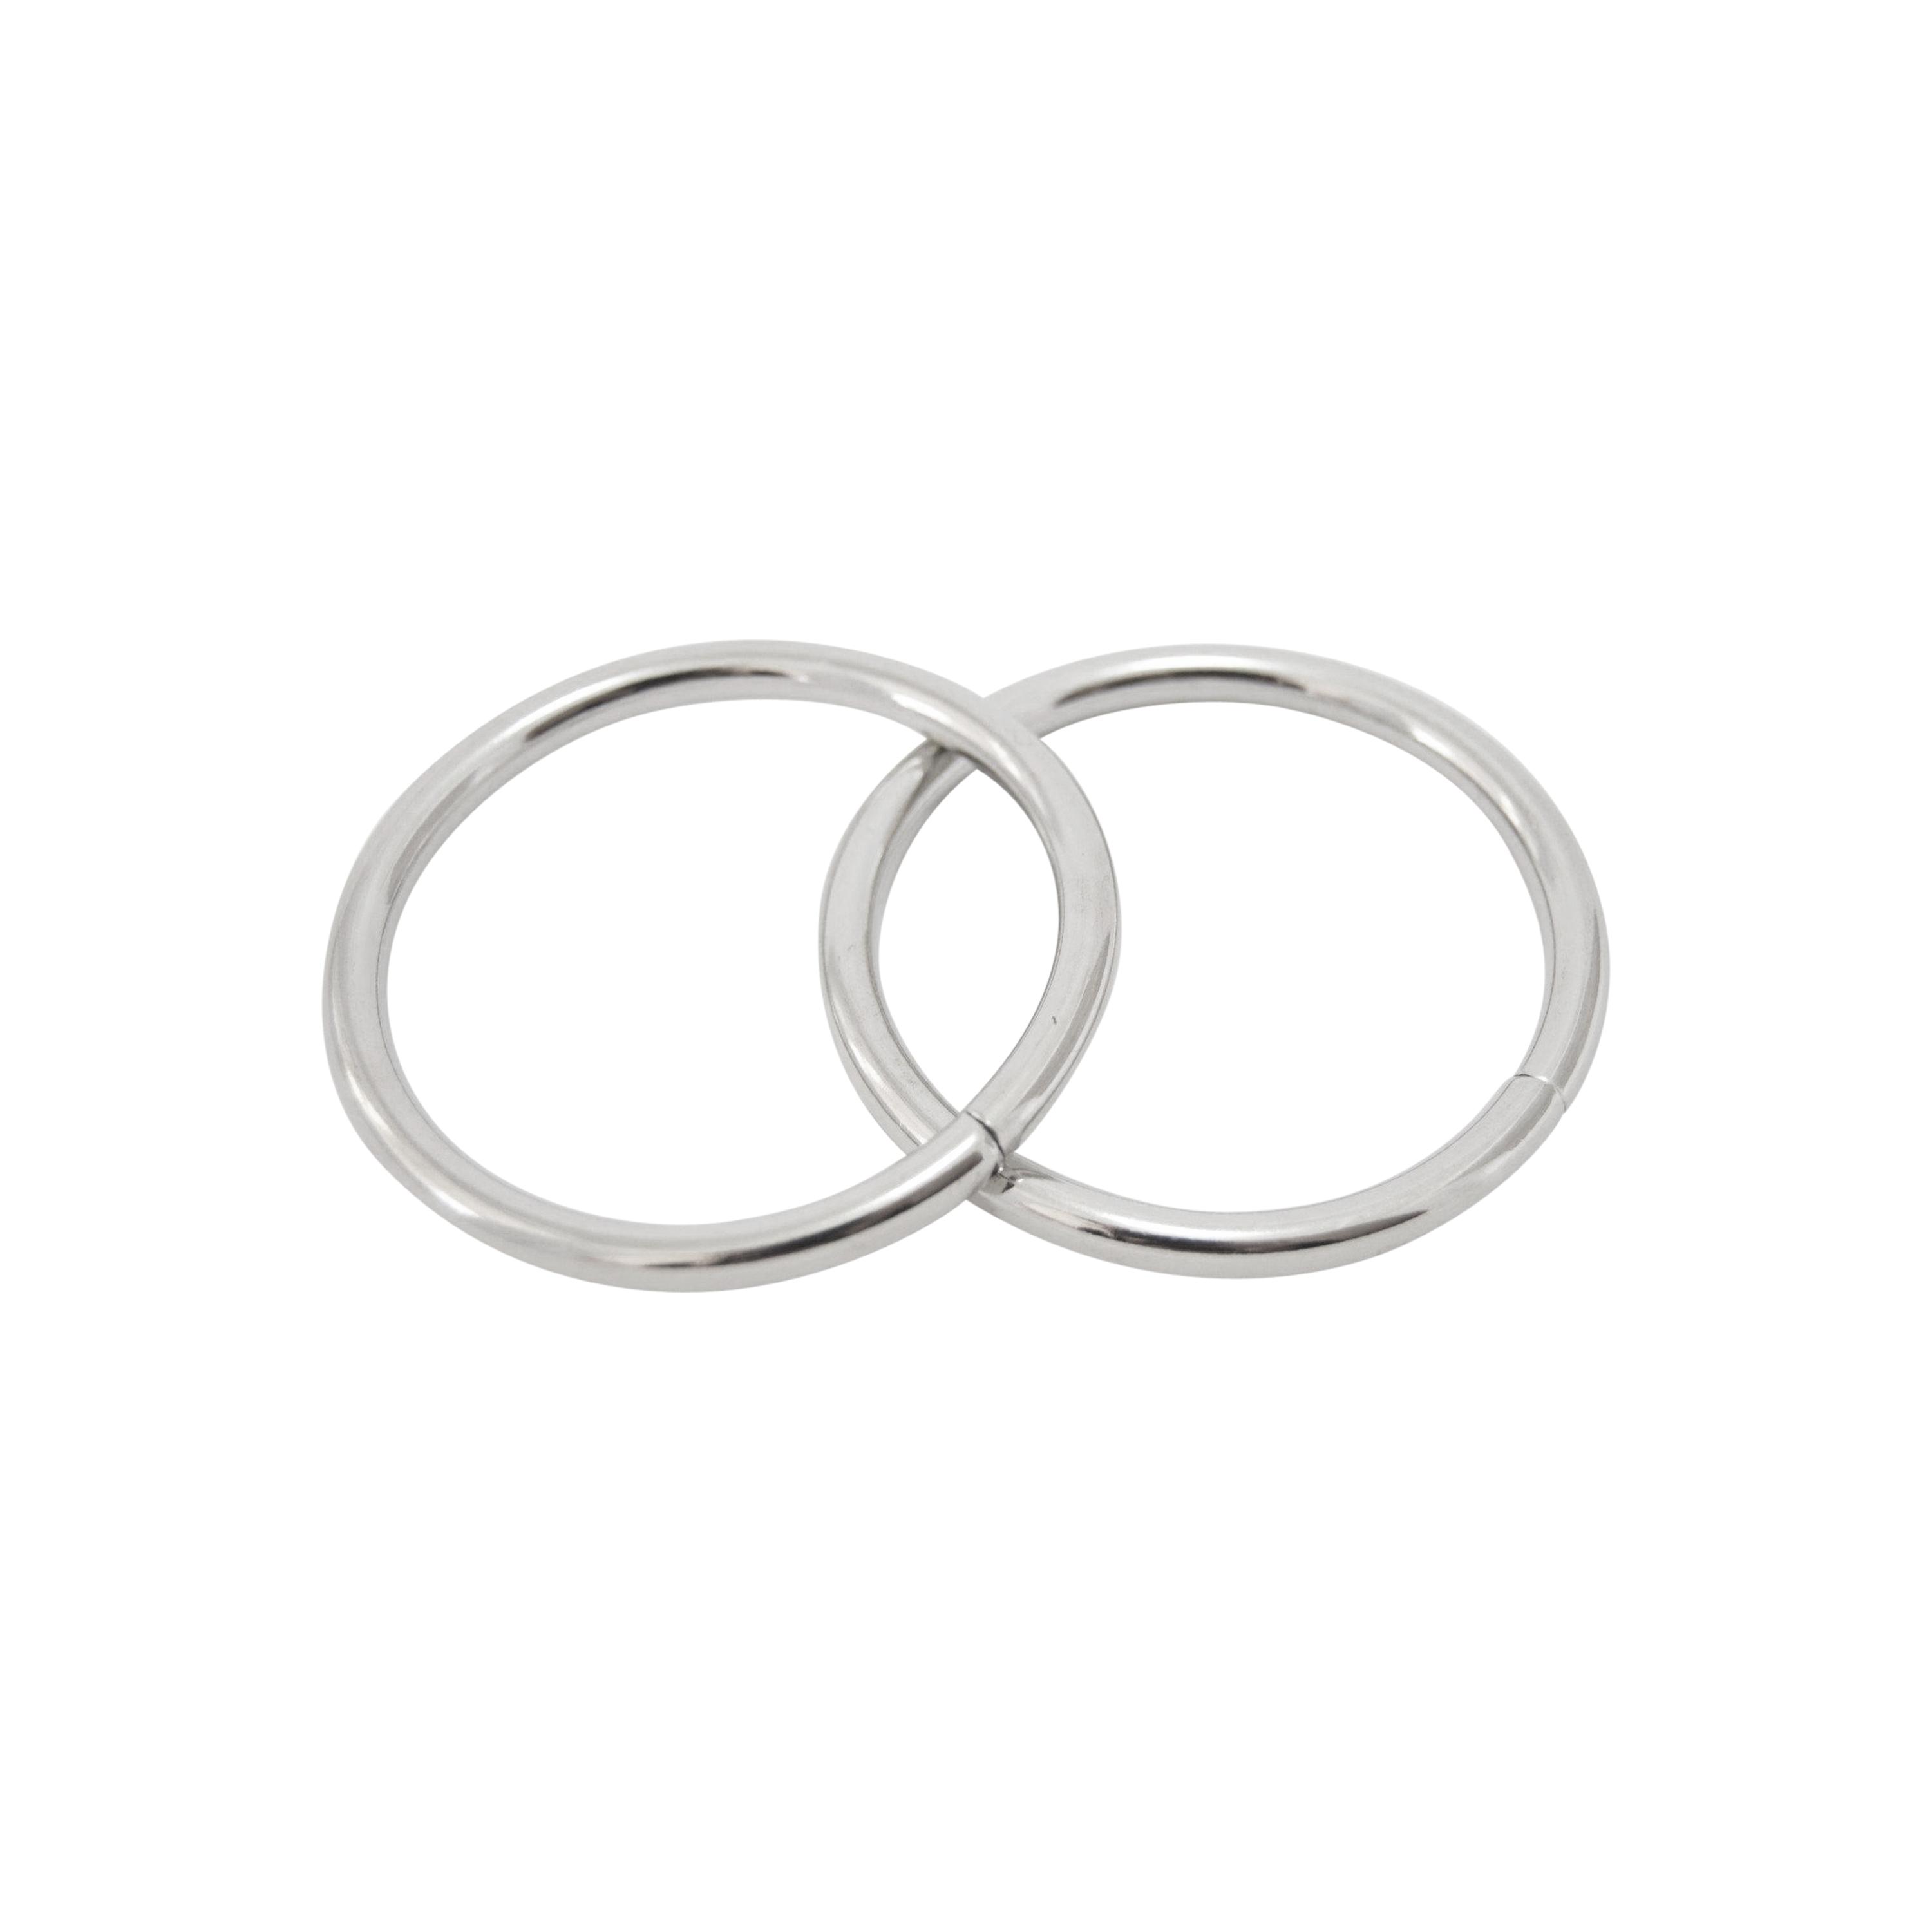 Silver 1 1/2" (38mm) diameter O rings which are 5mm thick